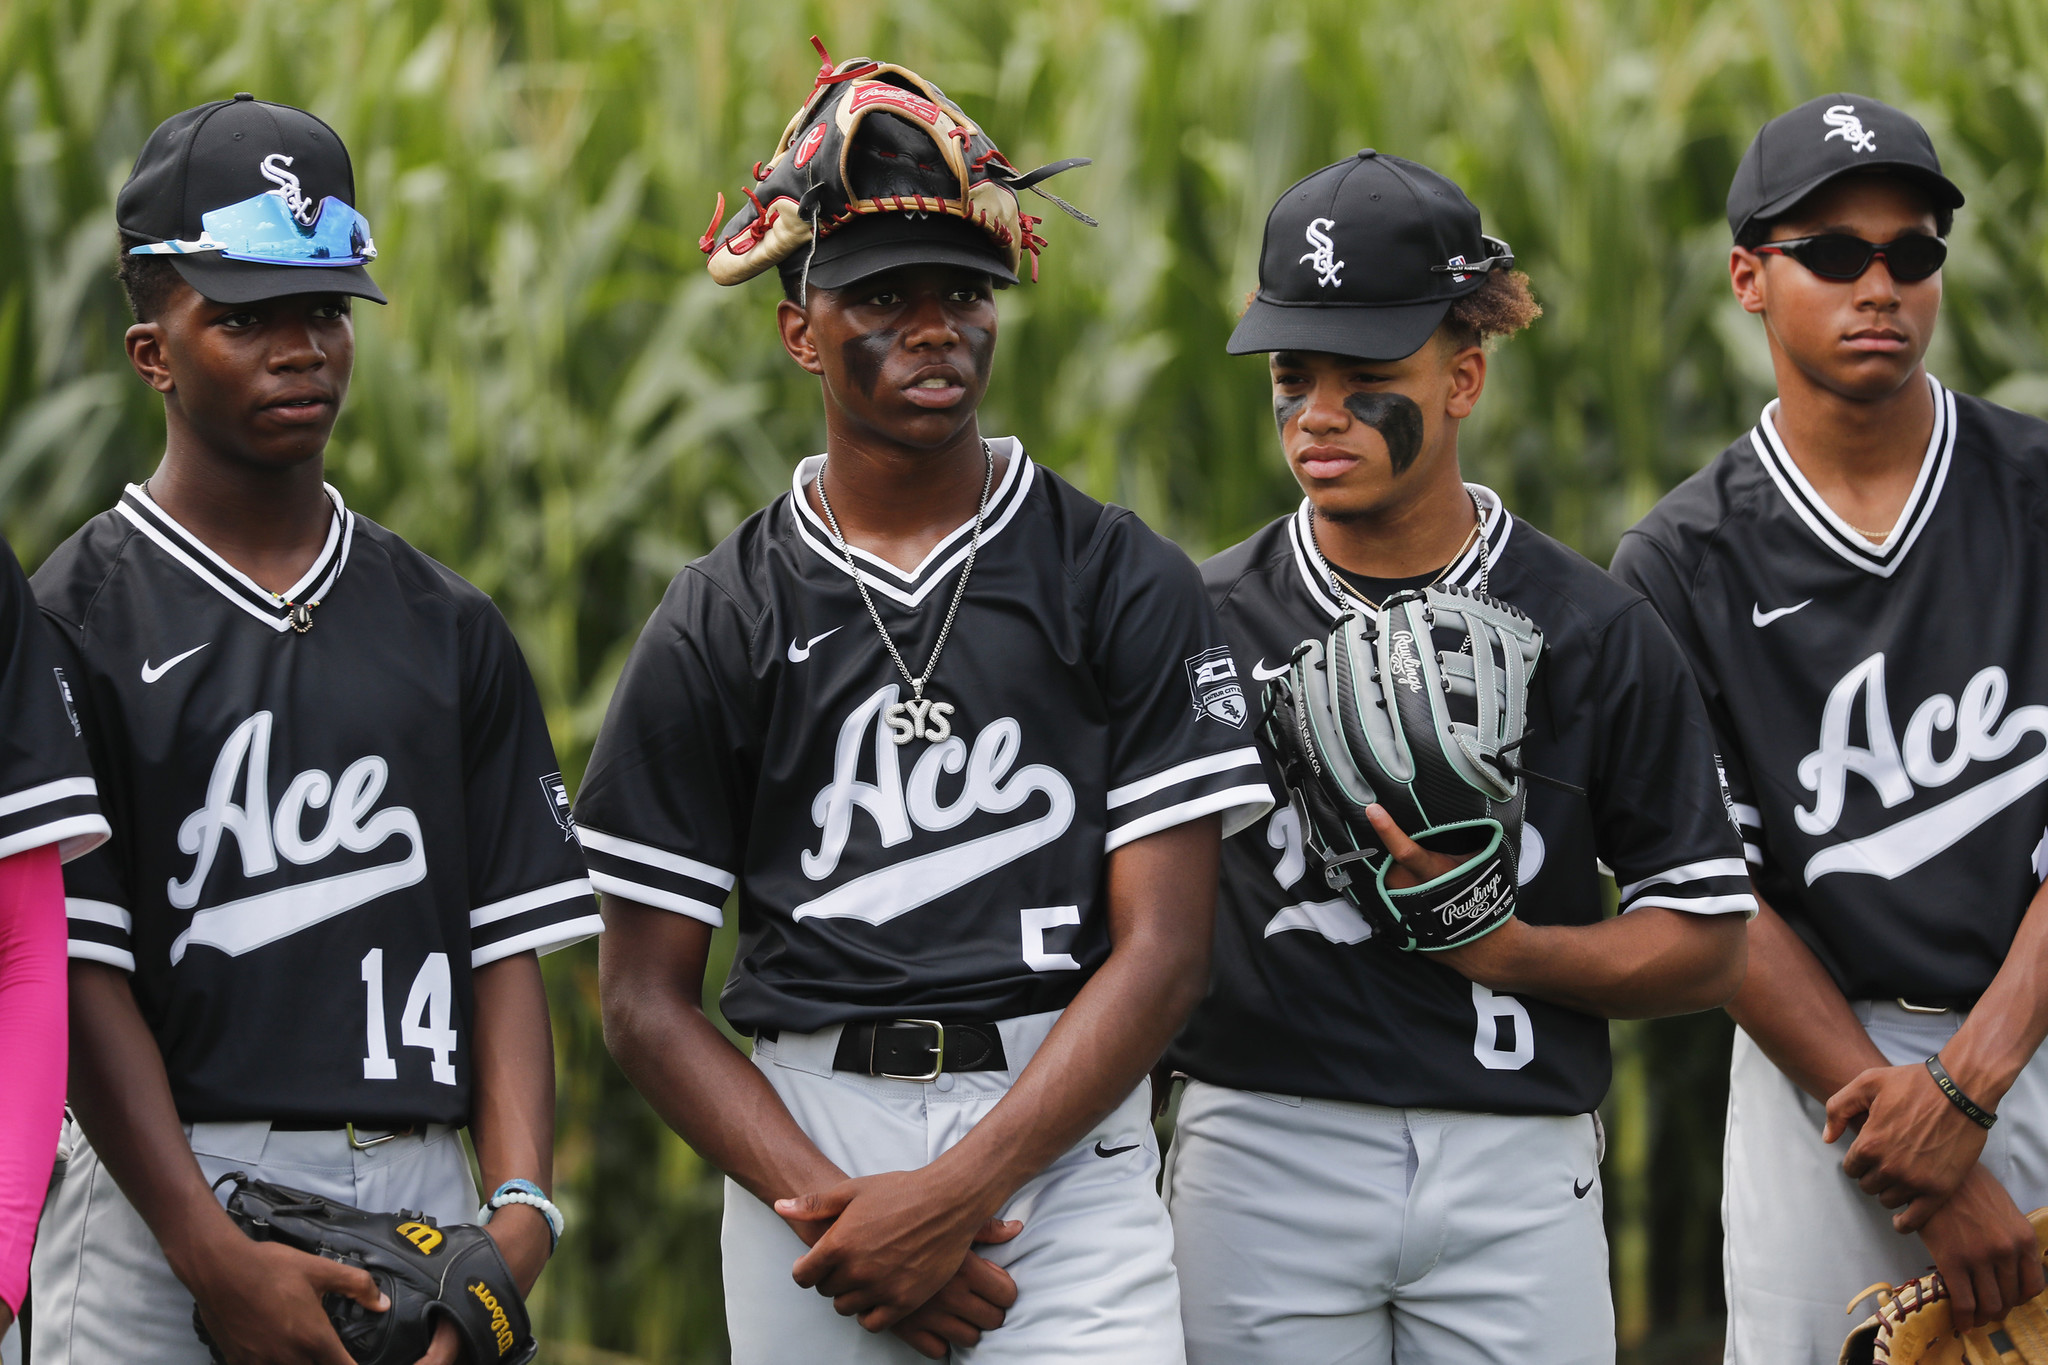 See Yankees, White Sox throwback uniforms for Field of Dreams game